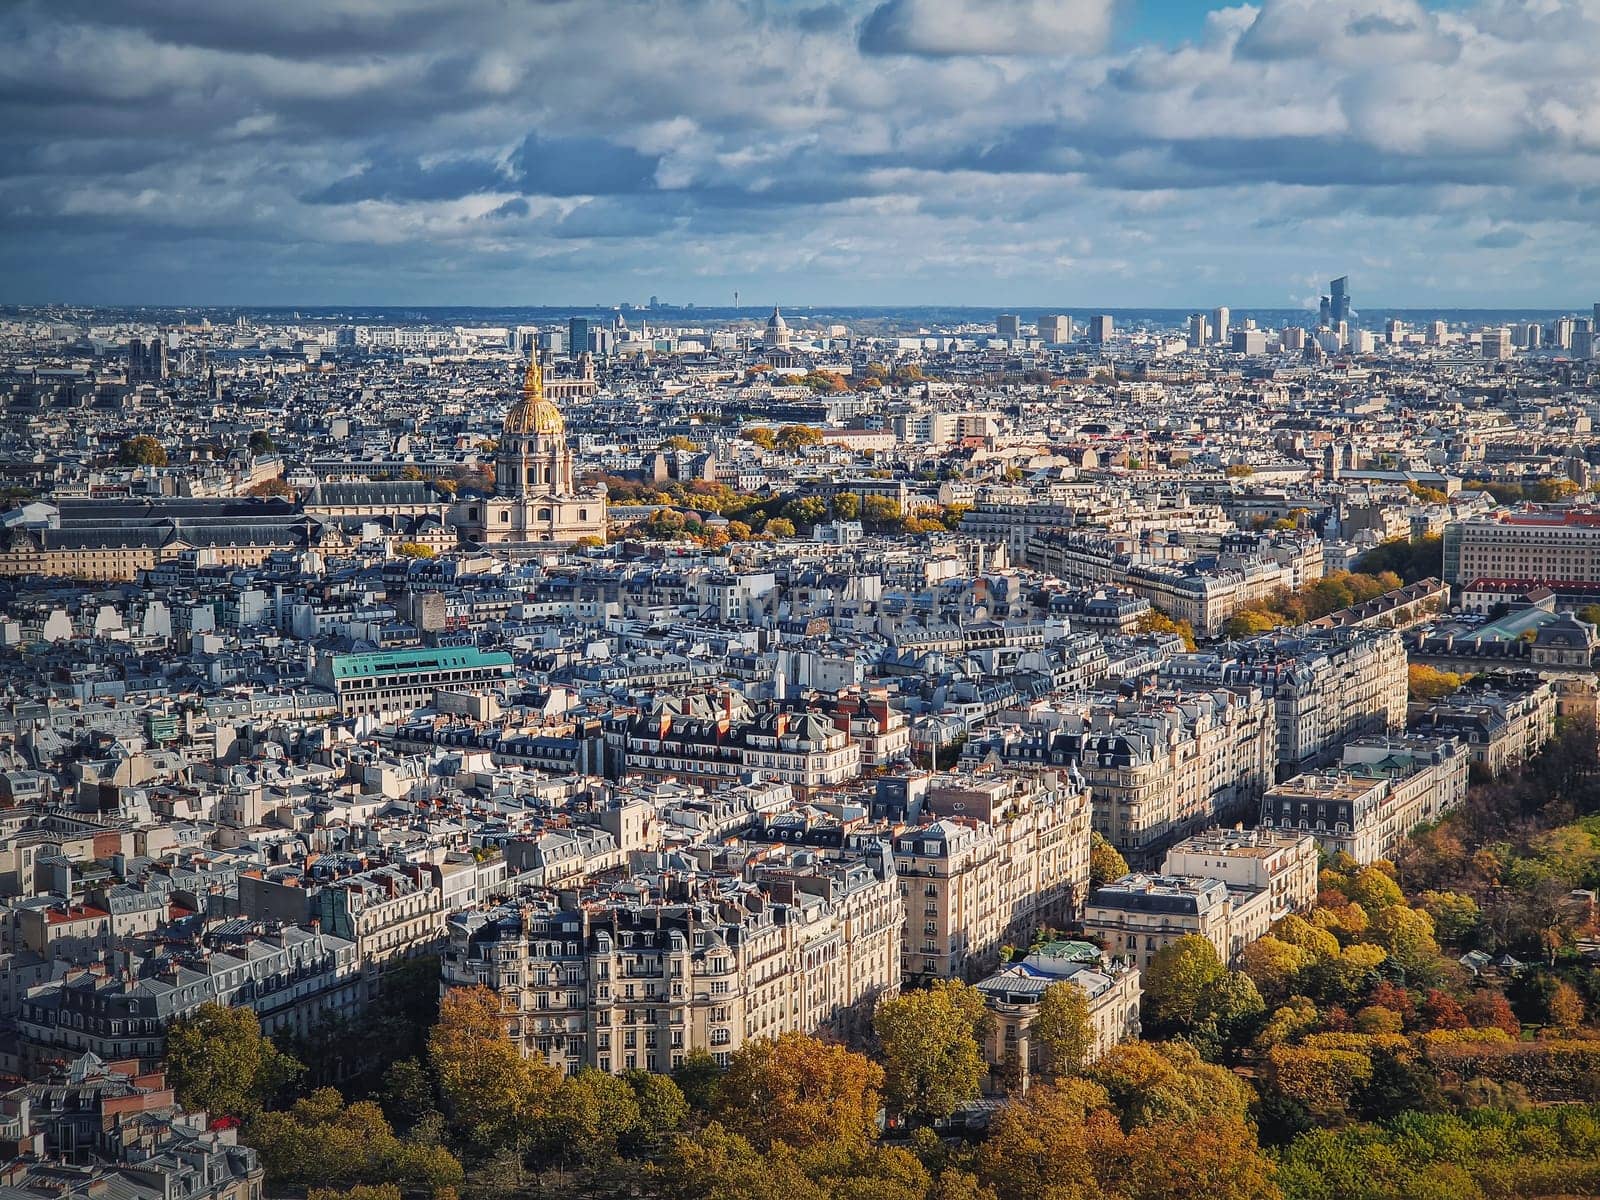 Sightseeing aerial view over the Paris city, France. Les Invalides building with golden dome seen on the horizon. Autumn parisian cityscape by psychoshadow